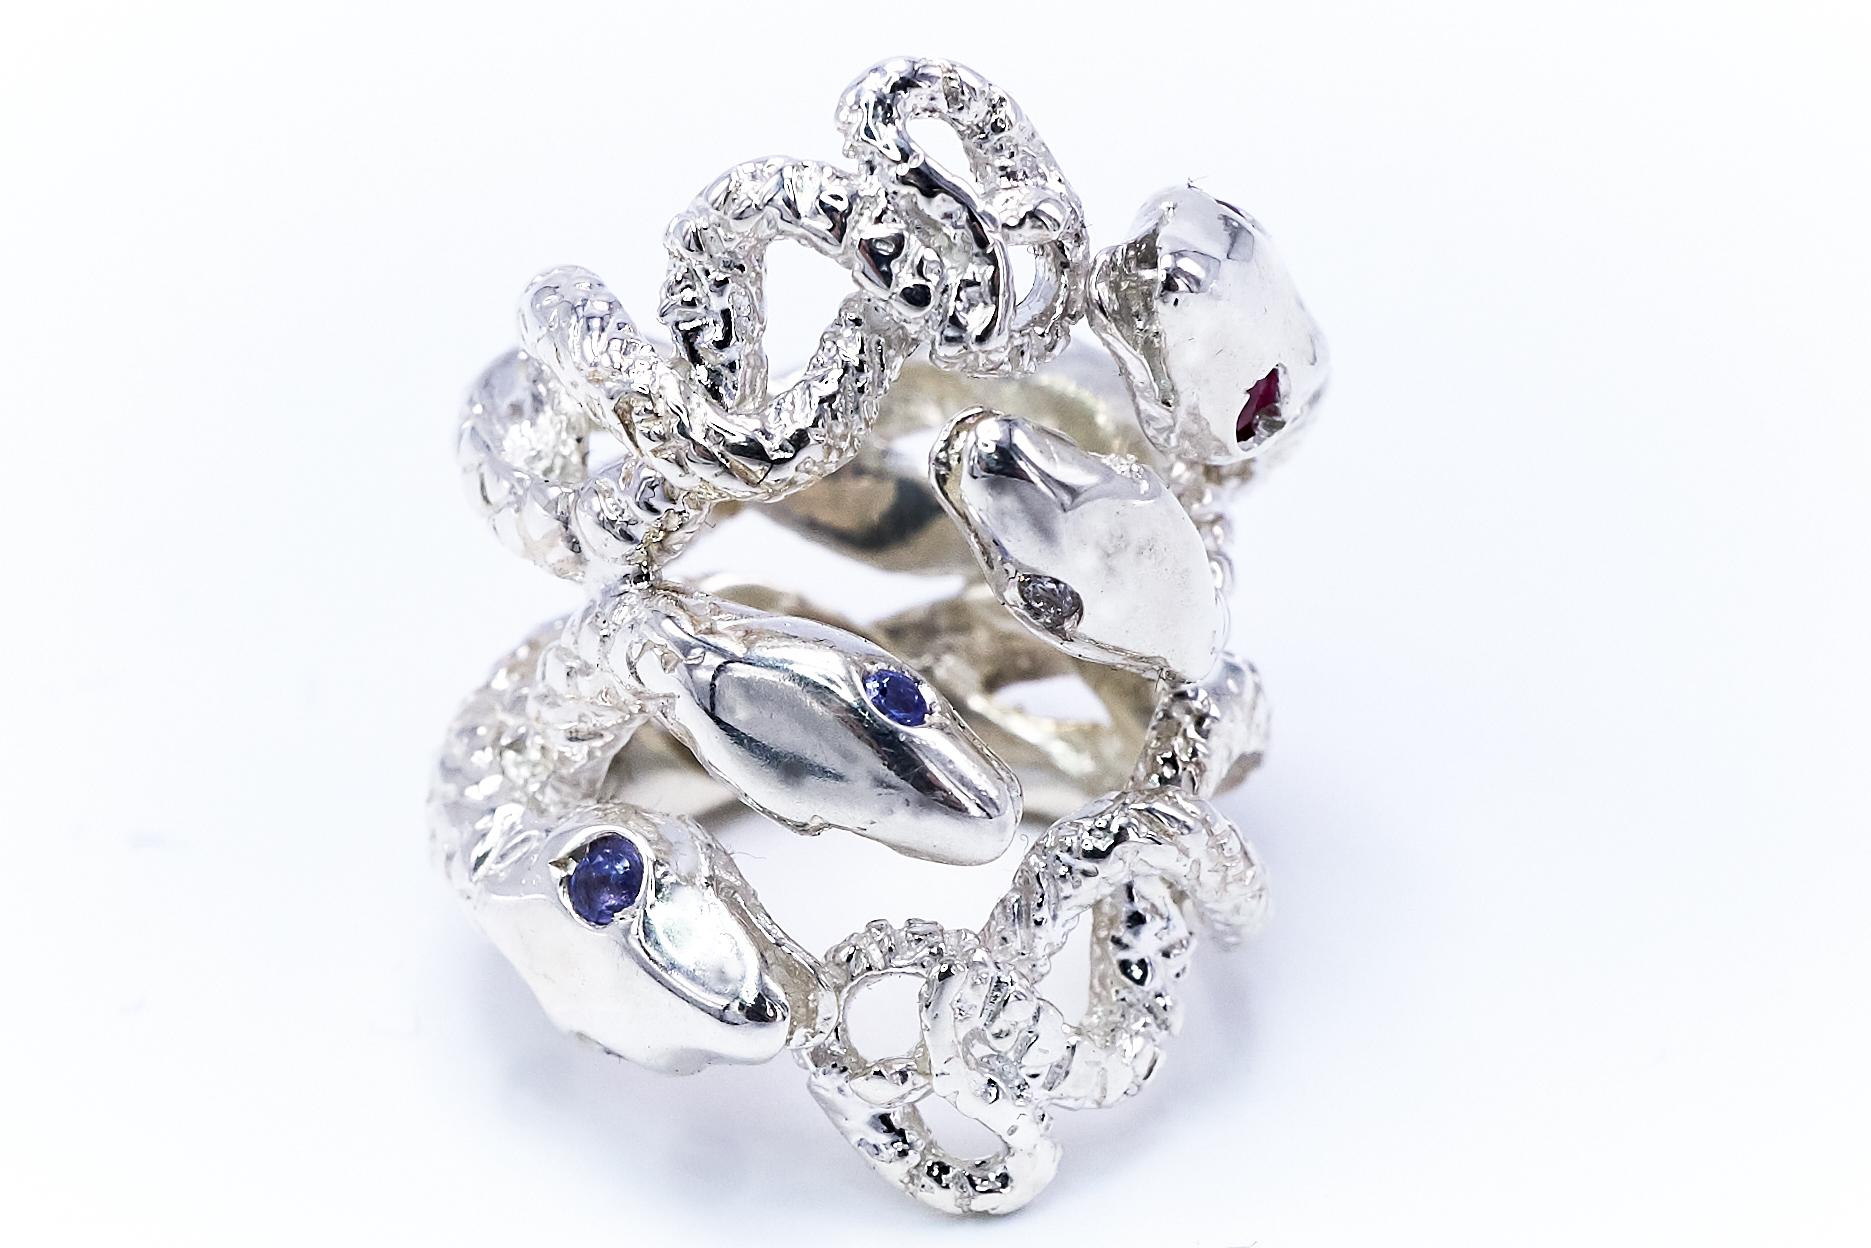 Snake Ring Statement Silver Cocktail Ring White Diamond Ruby Tanzanite J Dauphin For Sale 1